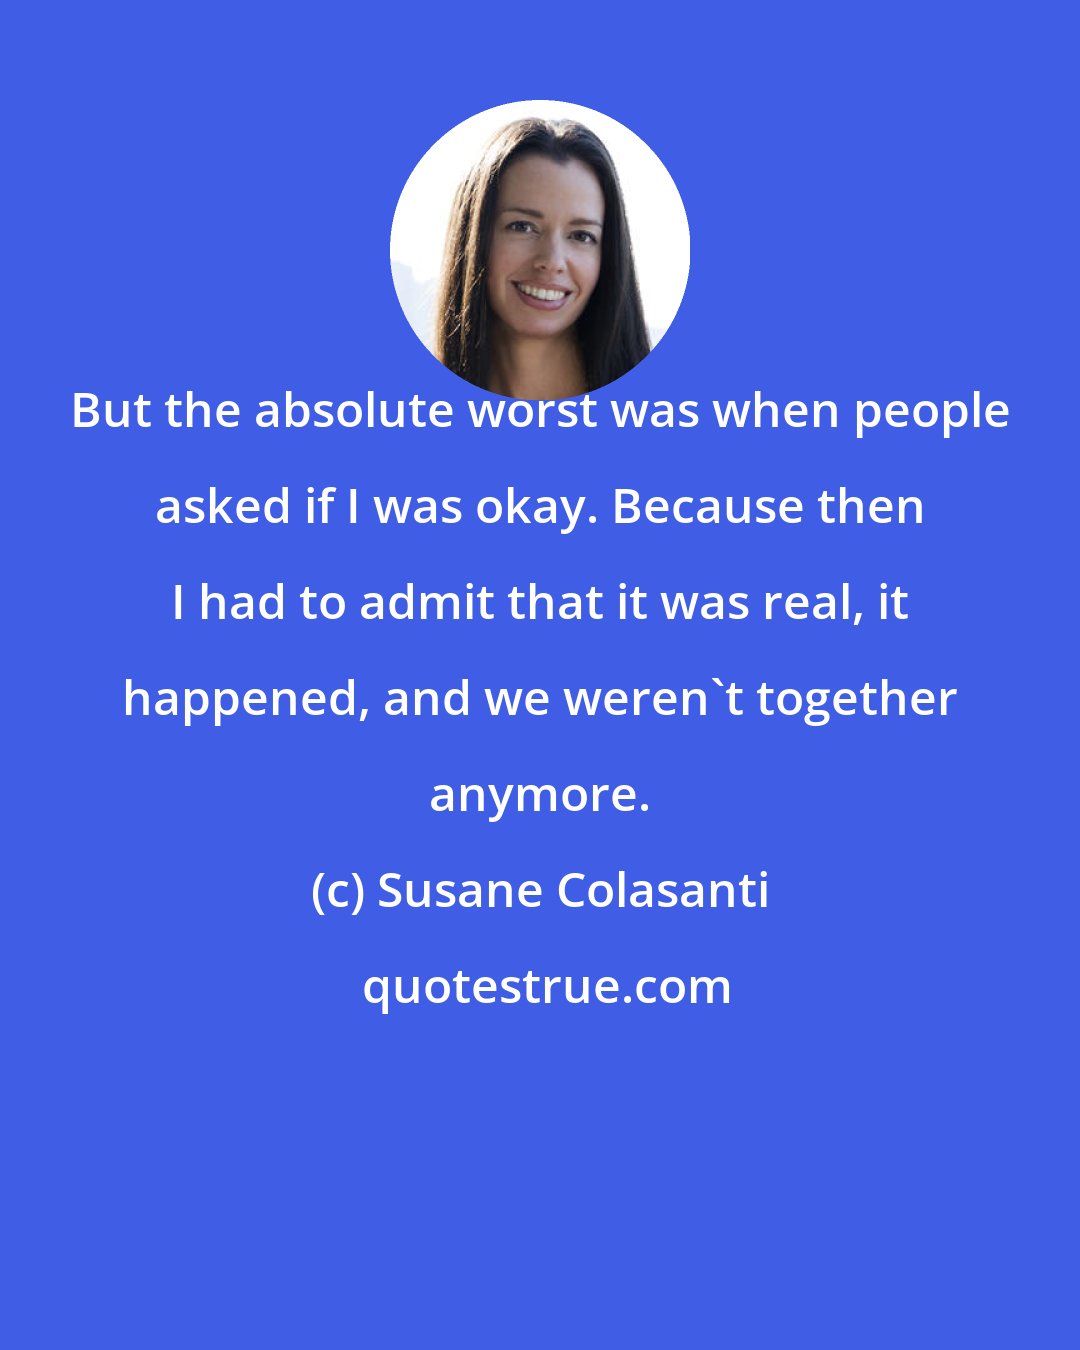 Susane Colasanti: But the absolute worst was when people asked if I was okay. Because then I had to admit that it was real, it happened, and we weren't together anymore.